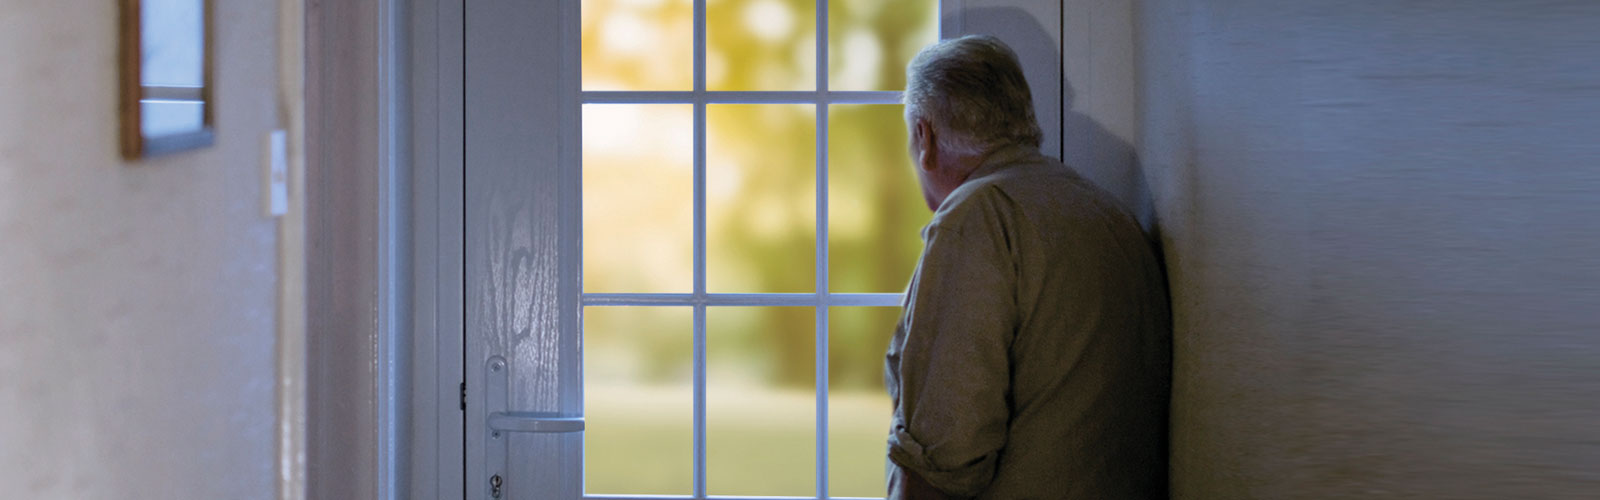 An older man looking out of a window 